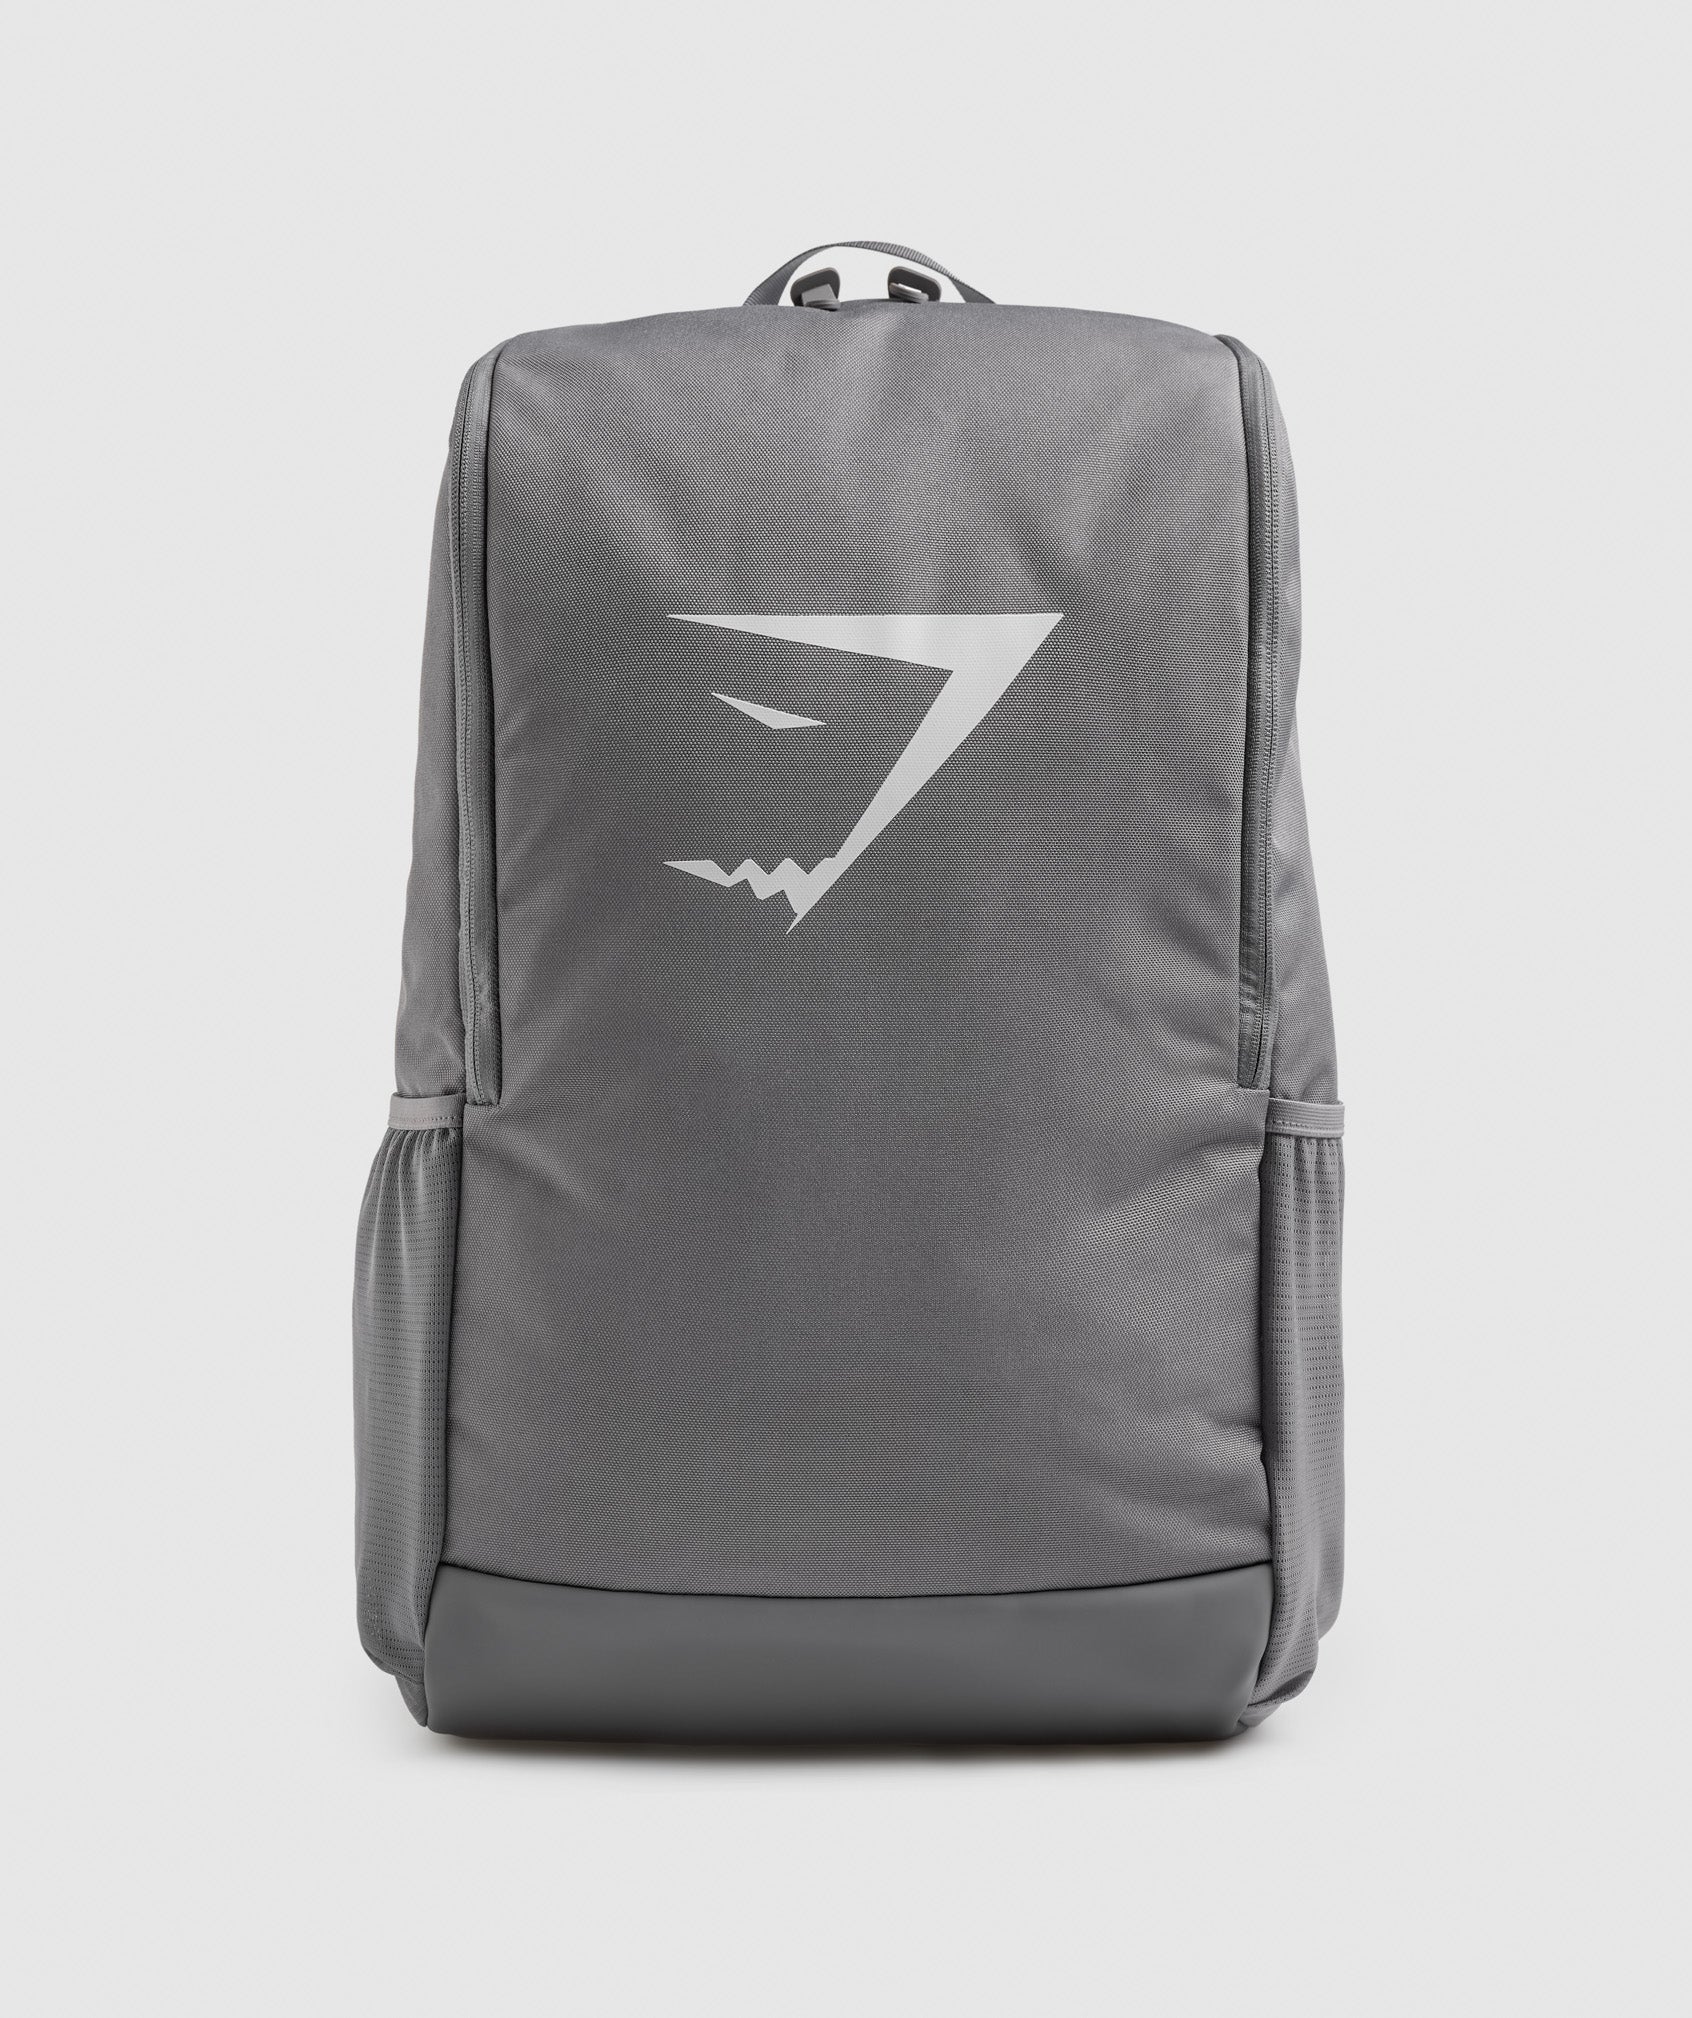 Sharkhead Backpack in Coin Grey - view 1